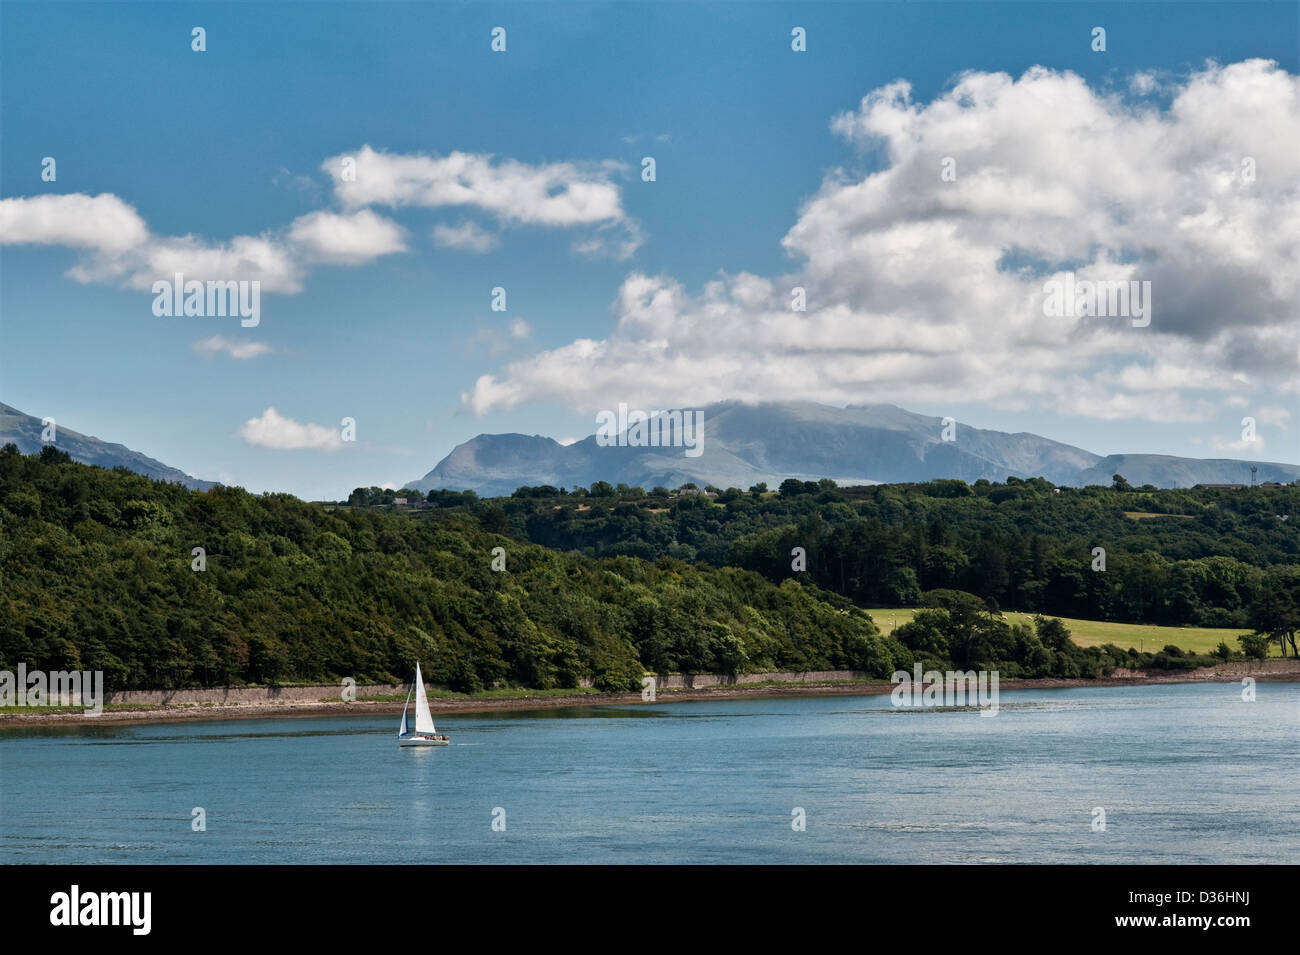 The gardens of Plas Newydd, Anglesey, Wales, UK, have spectacular views across the Menai Strait to the mountains of Snowdonia in north Wales Stock Photo